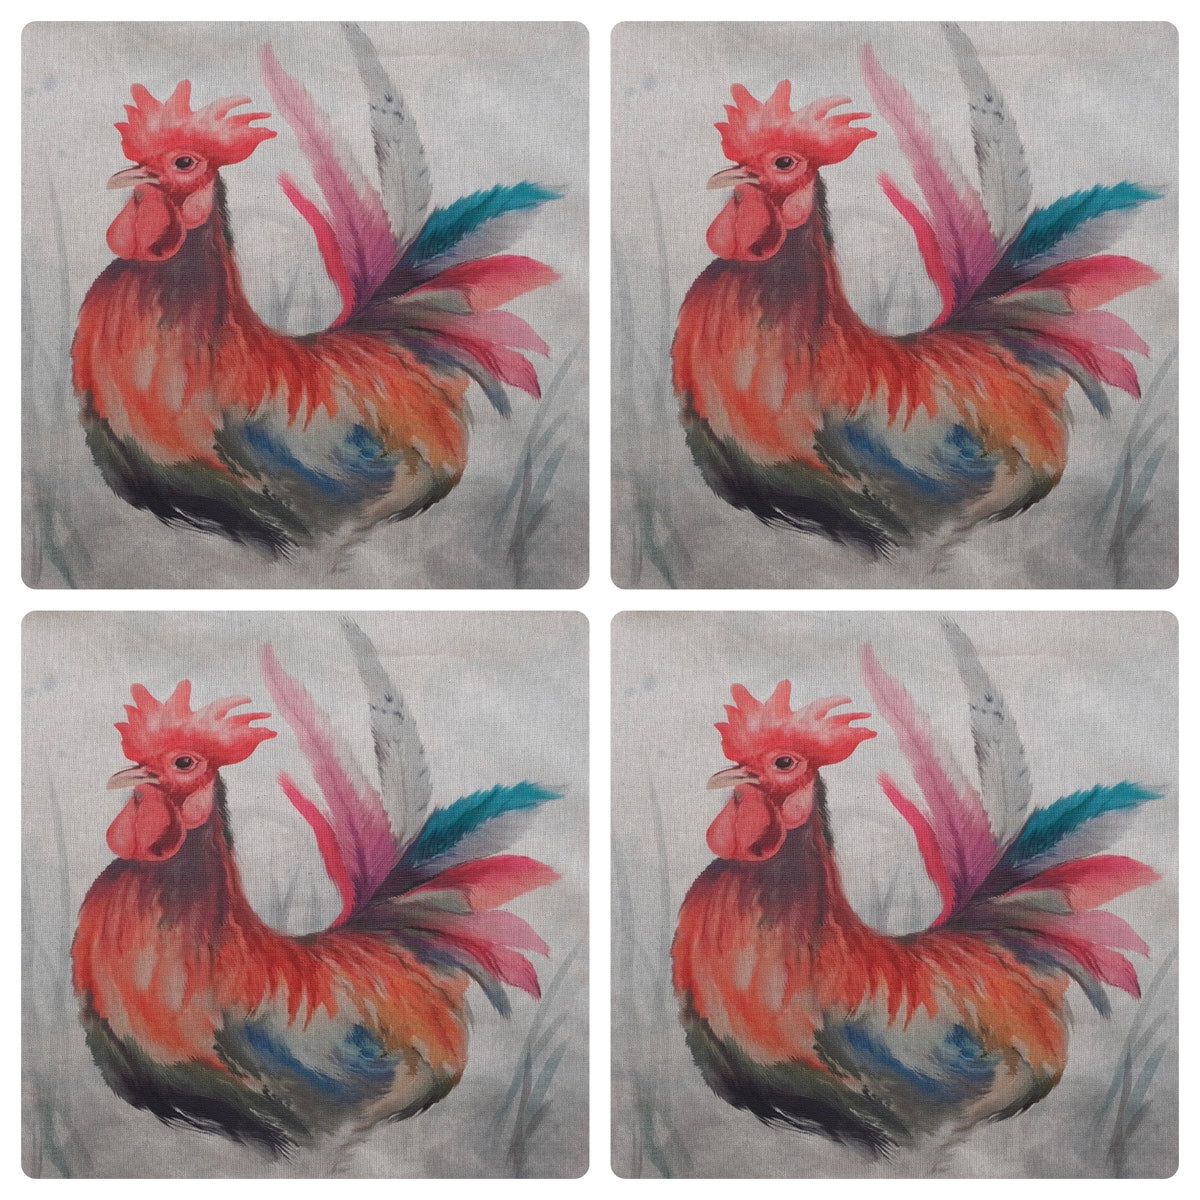 Special Offer! 4 Cockerel Cushion Panels for £6